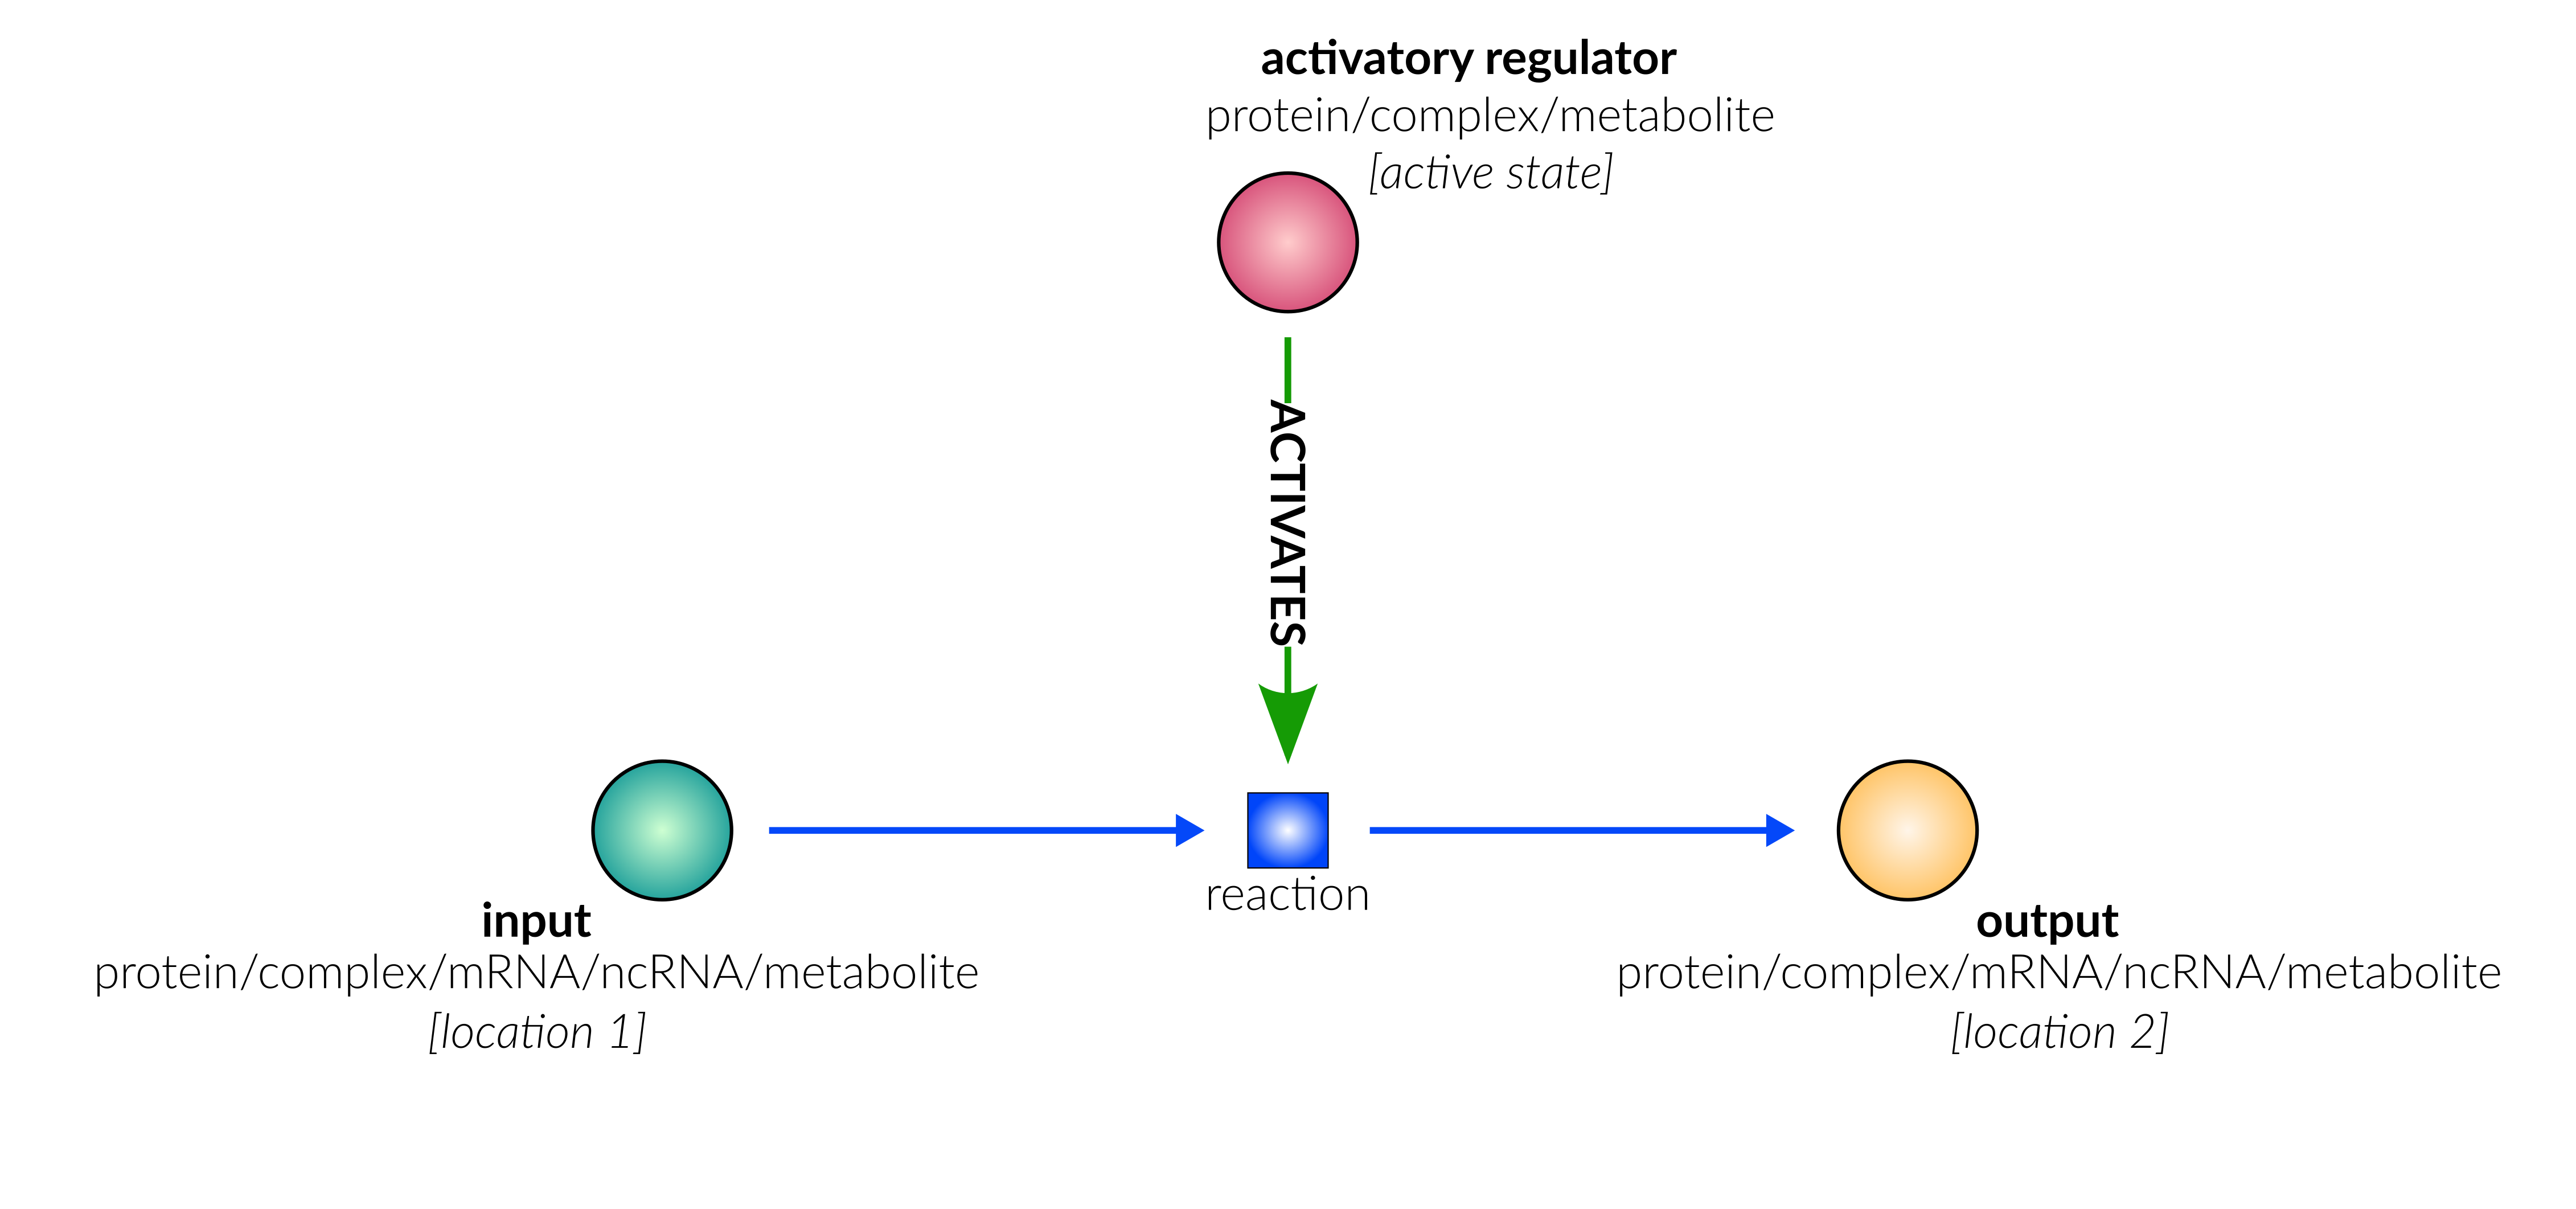 translocation reaction layout in database schematic